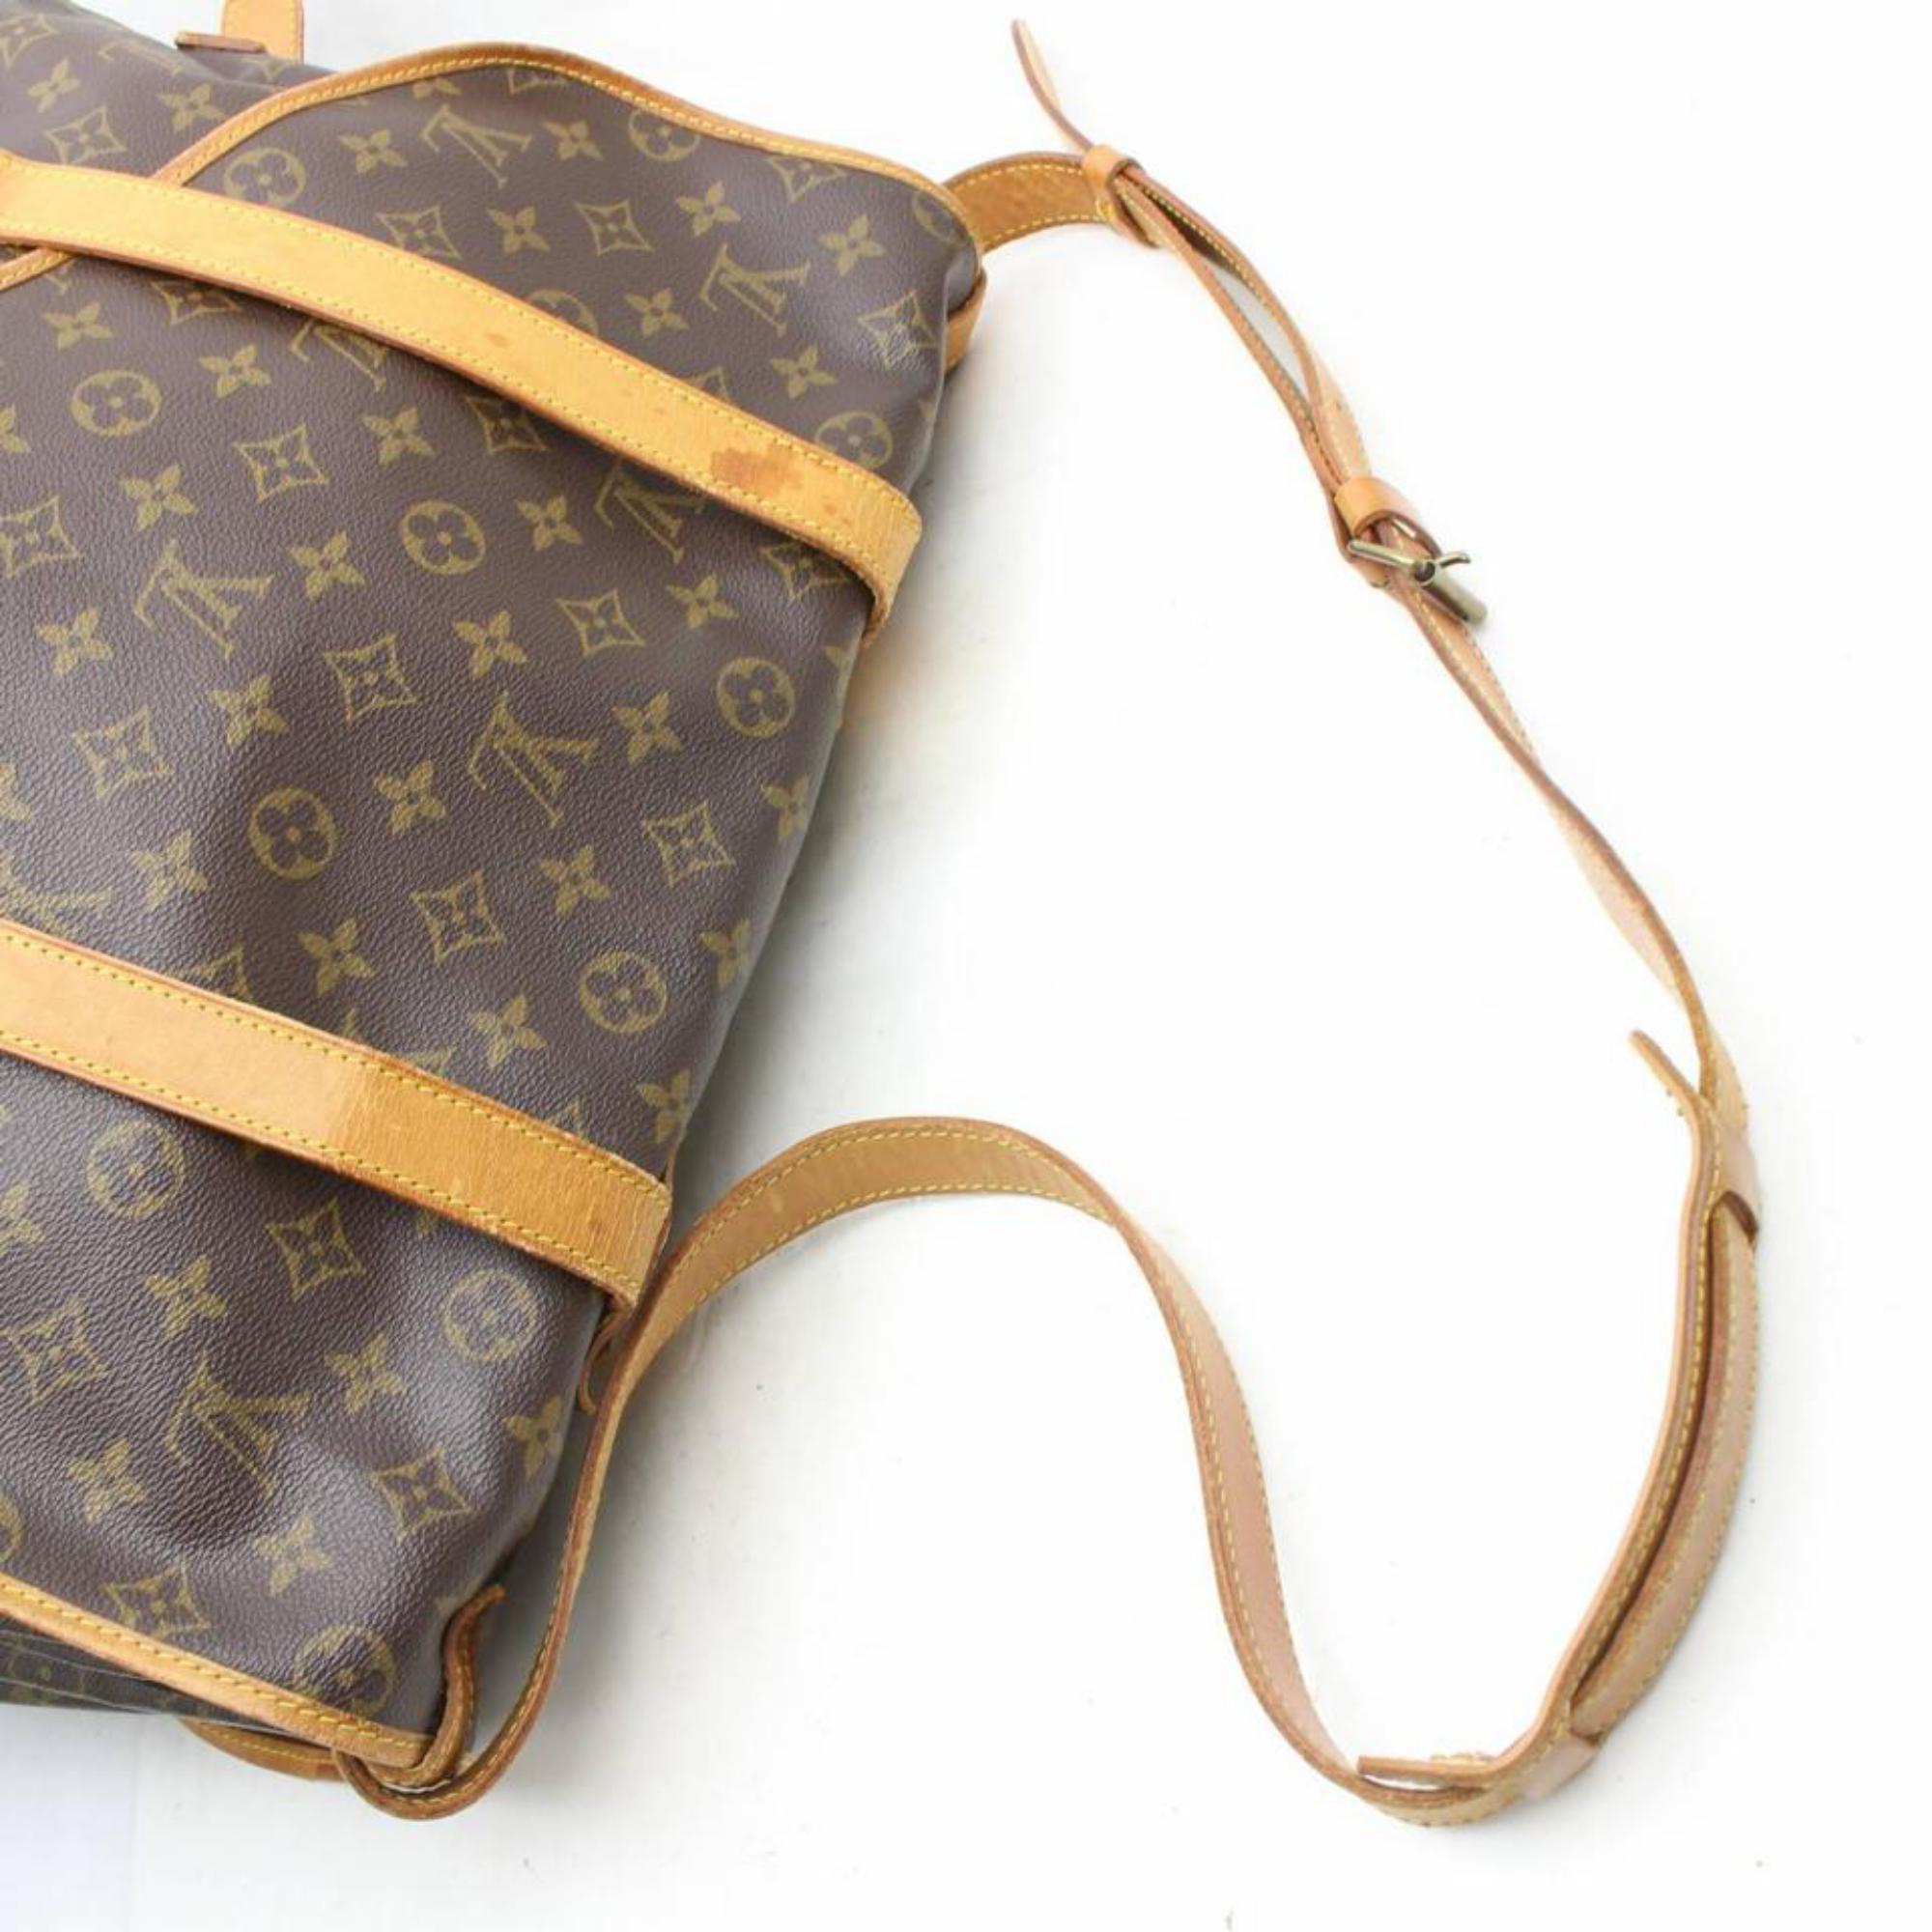 Louis Vuitton Saumur Monogram 43 Gm Saddle 869500 Brown Canvas Messenger Bag In Good Condition For Sale In Forest Hills, NY